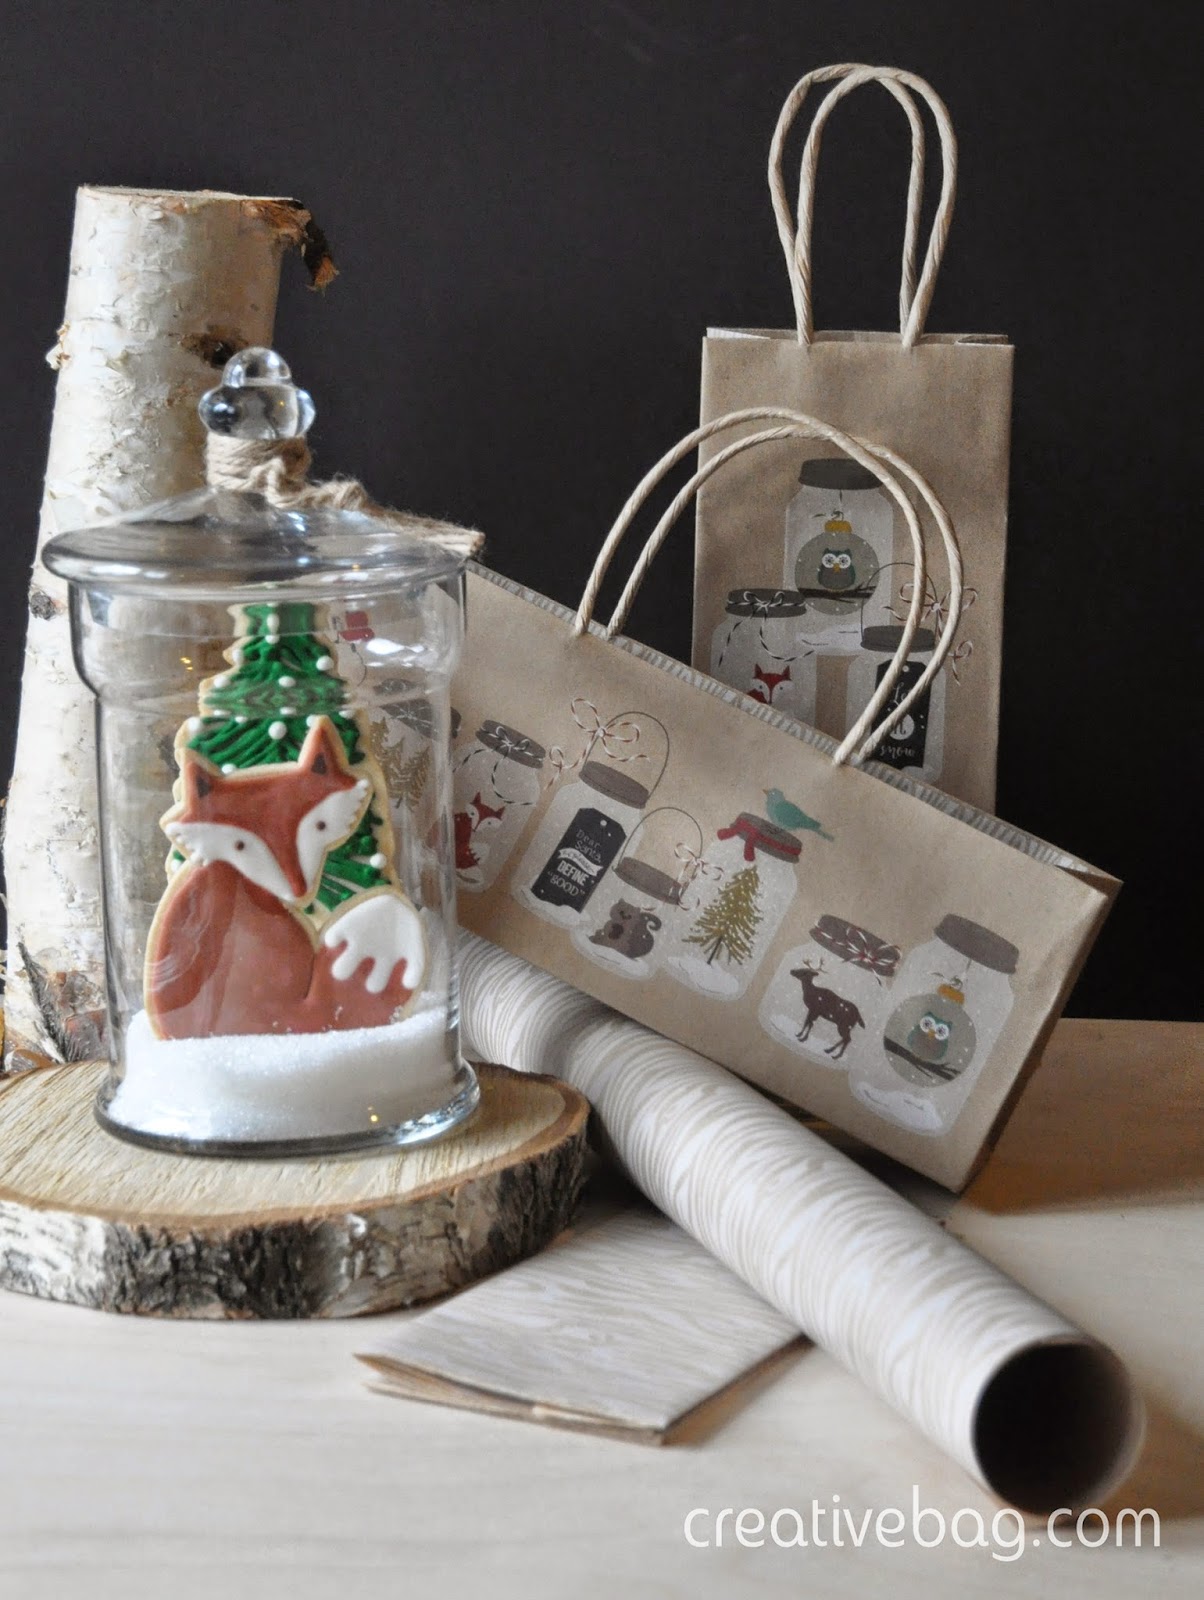 custom made cookies packaged in glass containers for holiday gift giving | creativebag.com